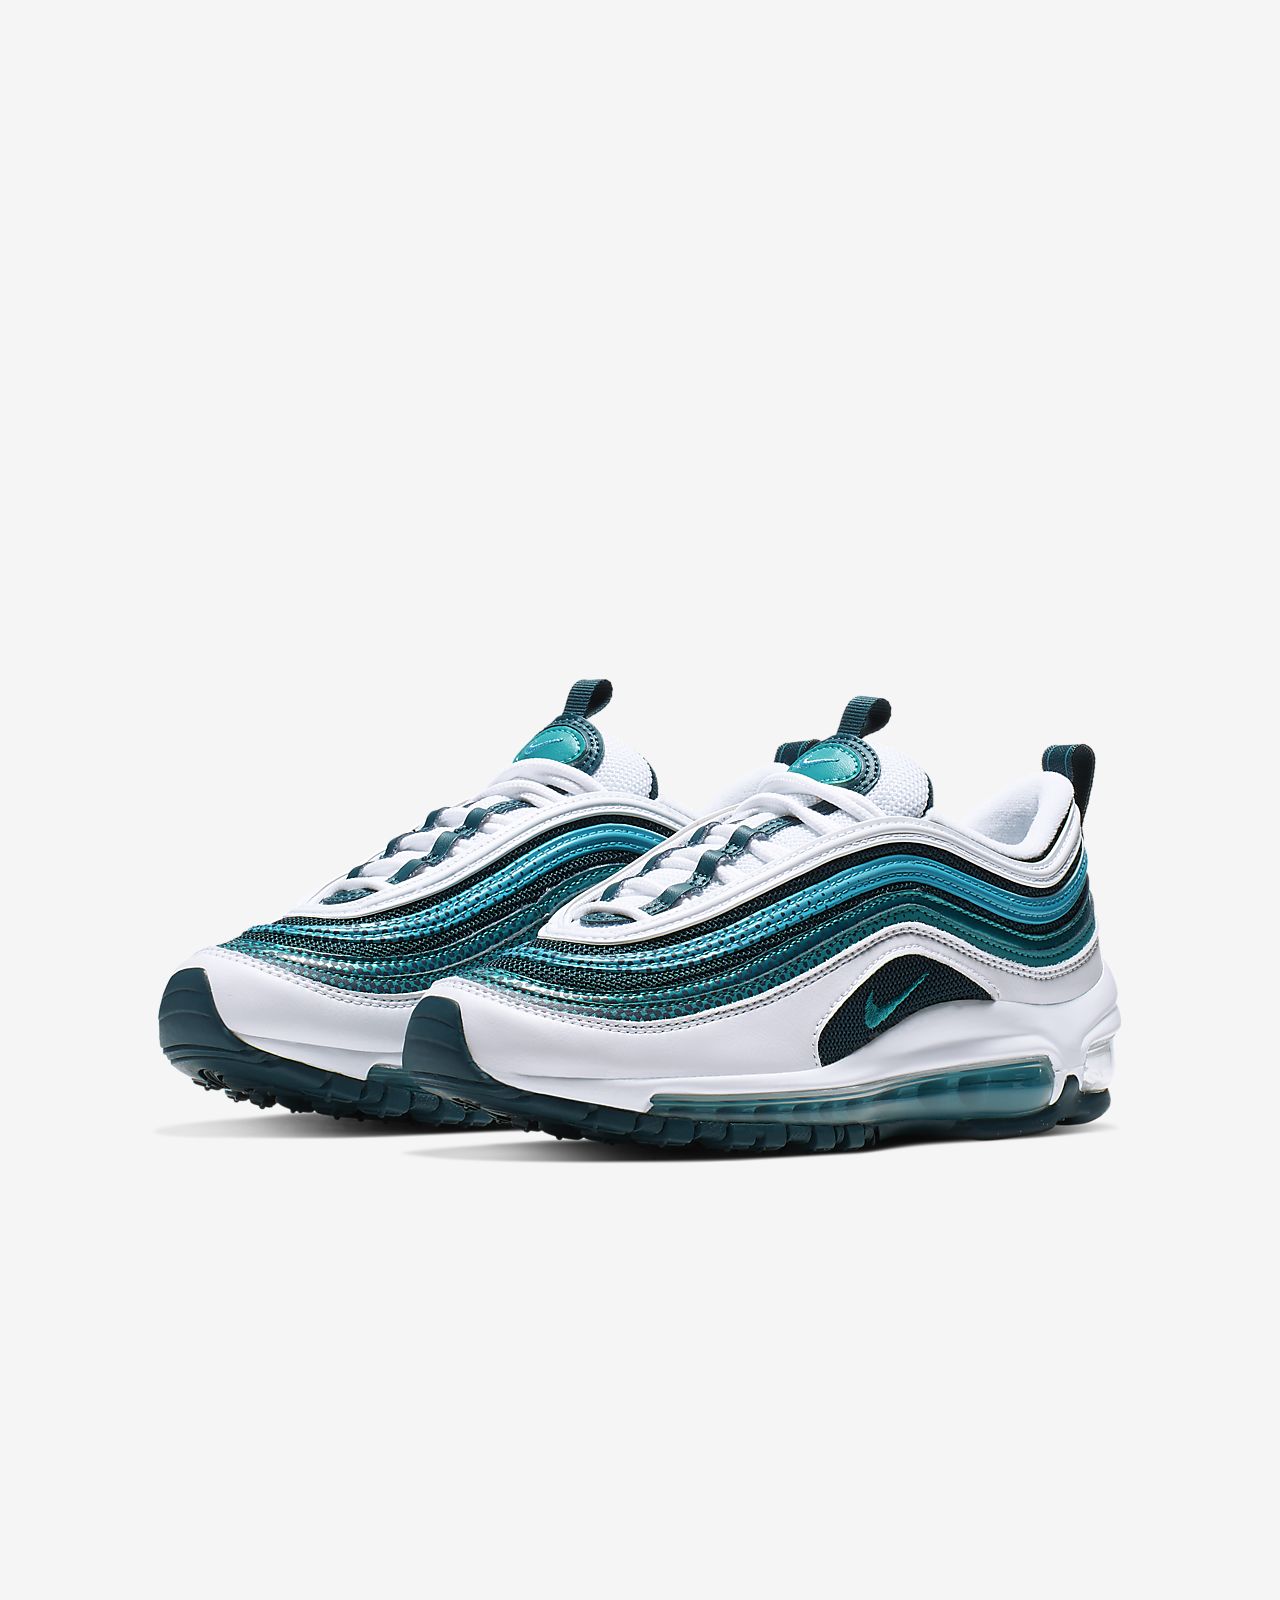 nike air max 97 blu e nere Shop Clothing & Shoes Online